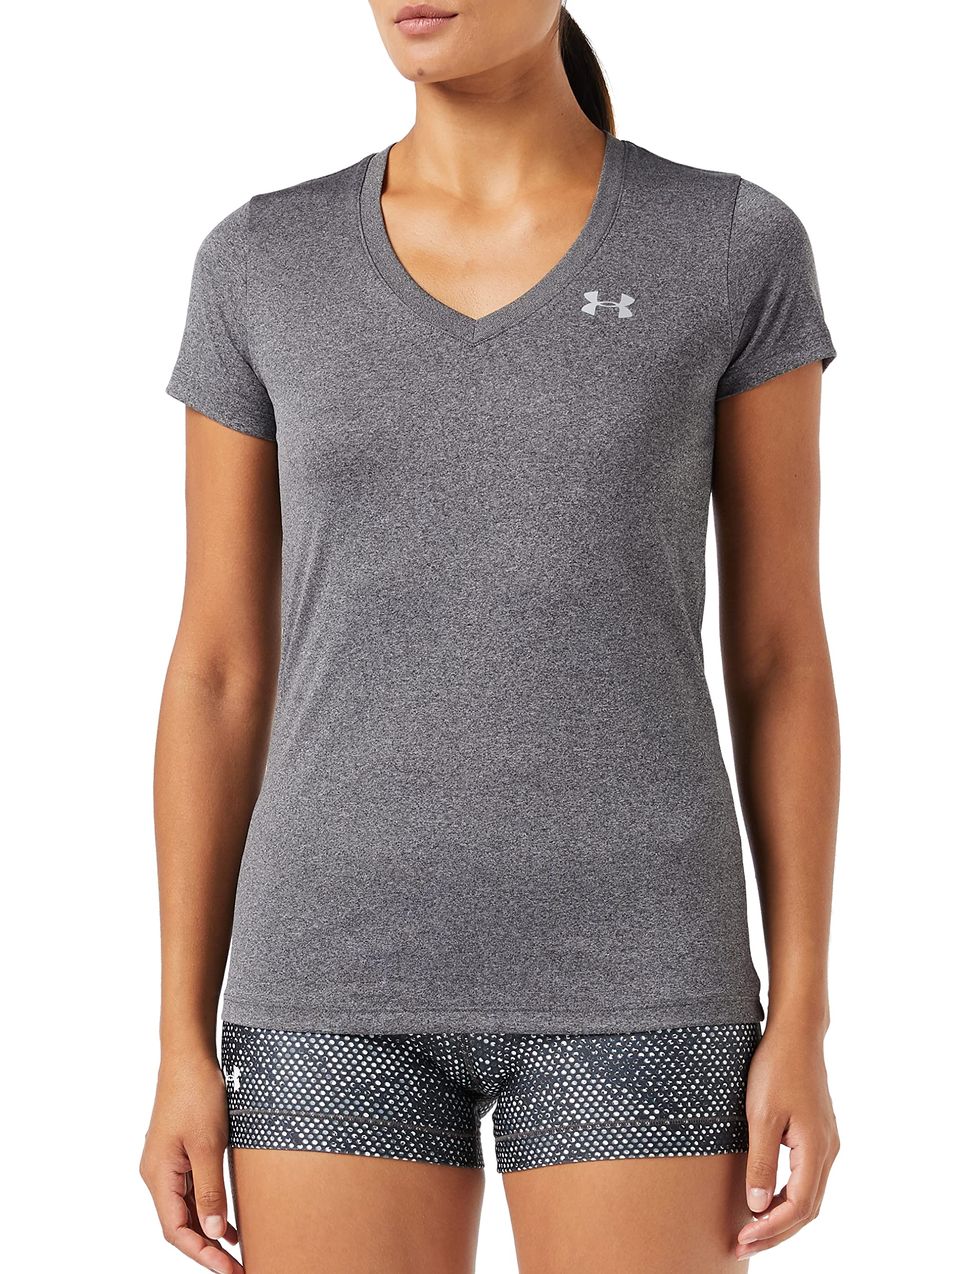 Workout Tops For Women: Trainers & Editors Share Their Favorites